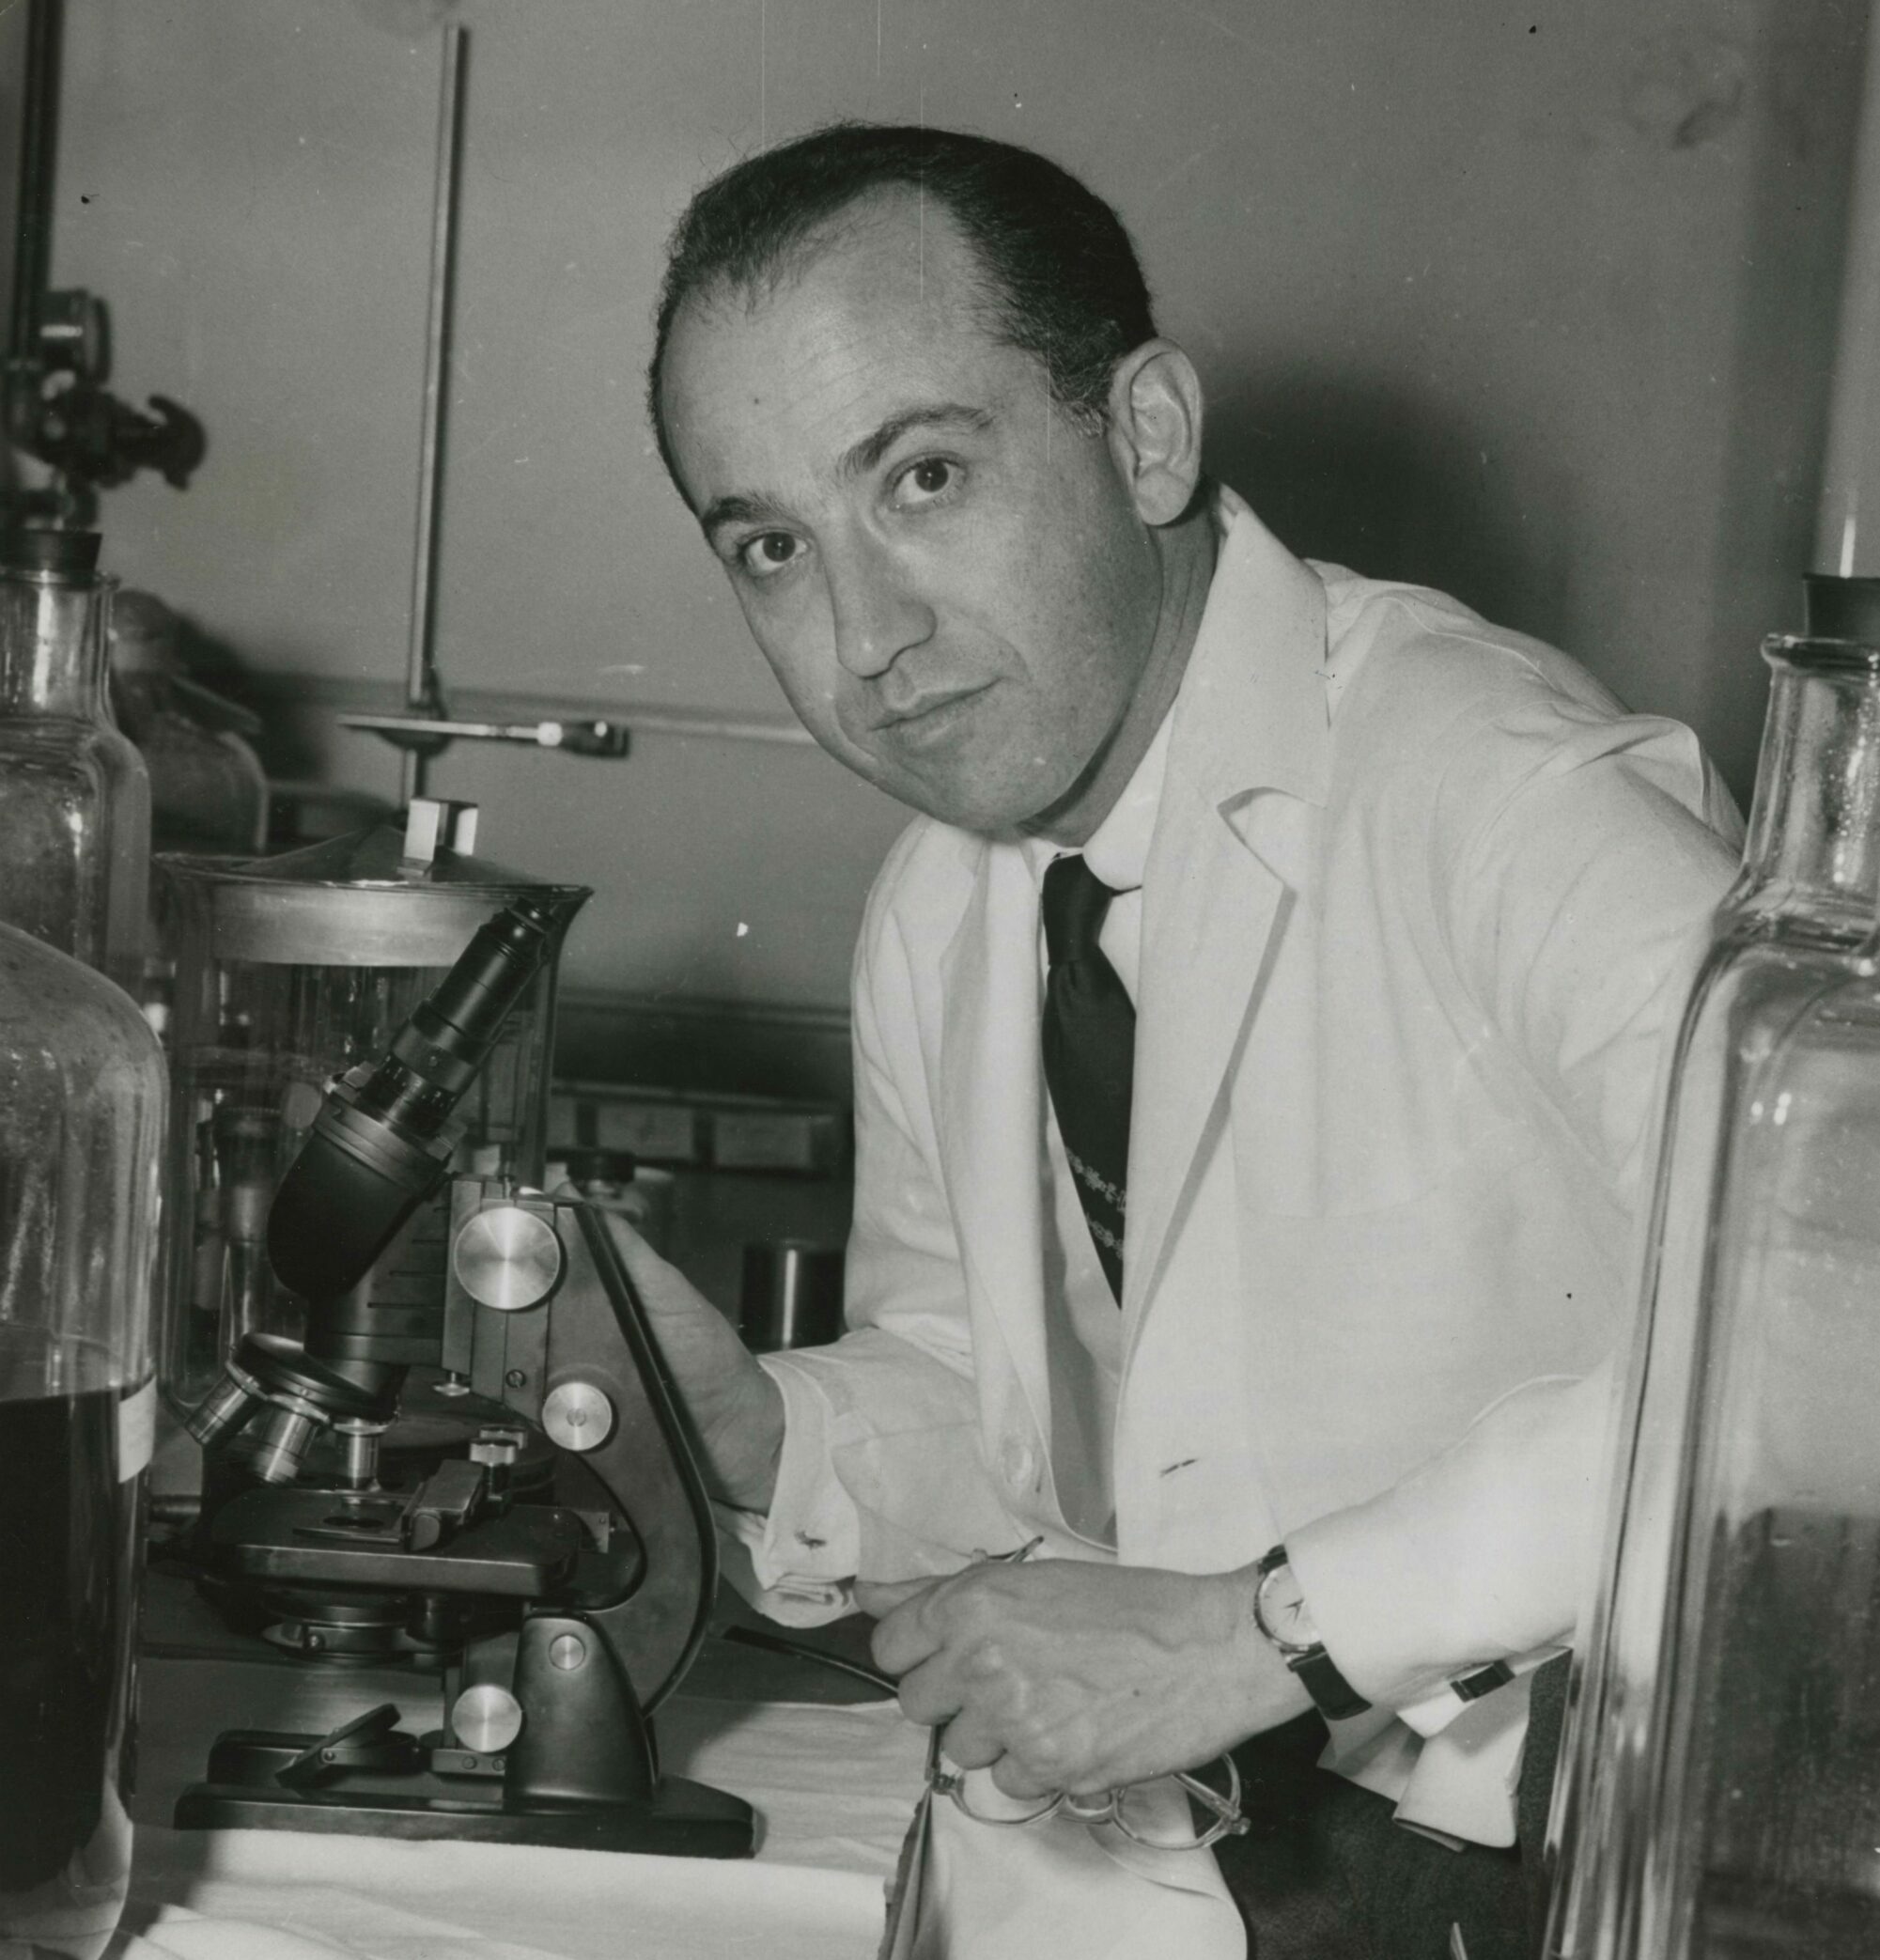 Jonas Salk looks up from his microscope and wears lab attire.